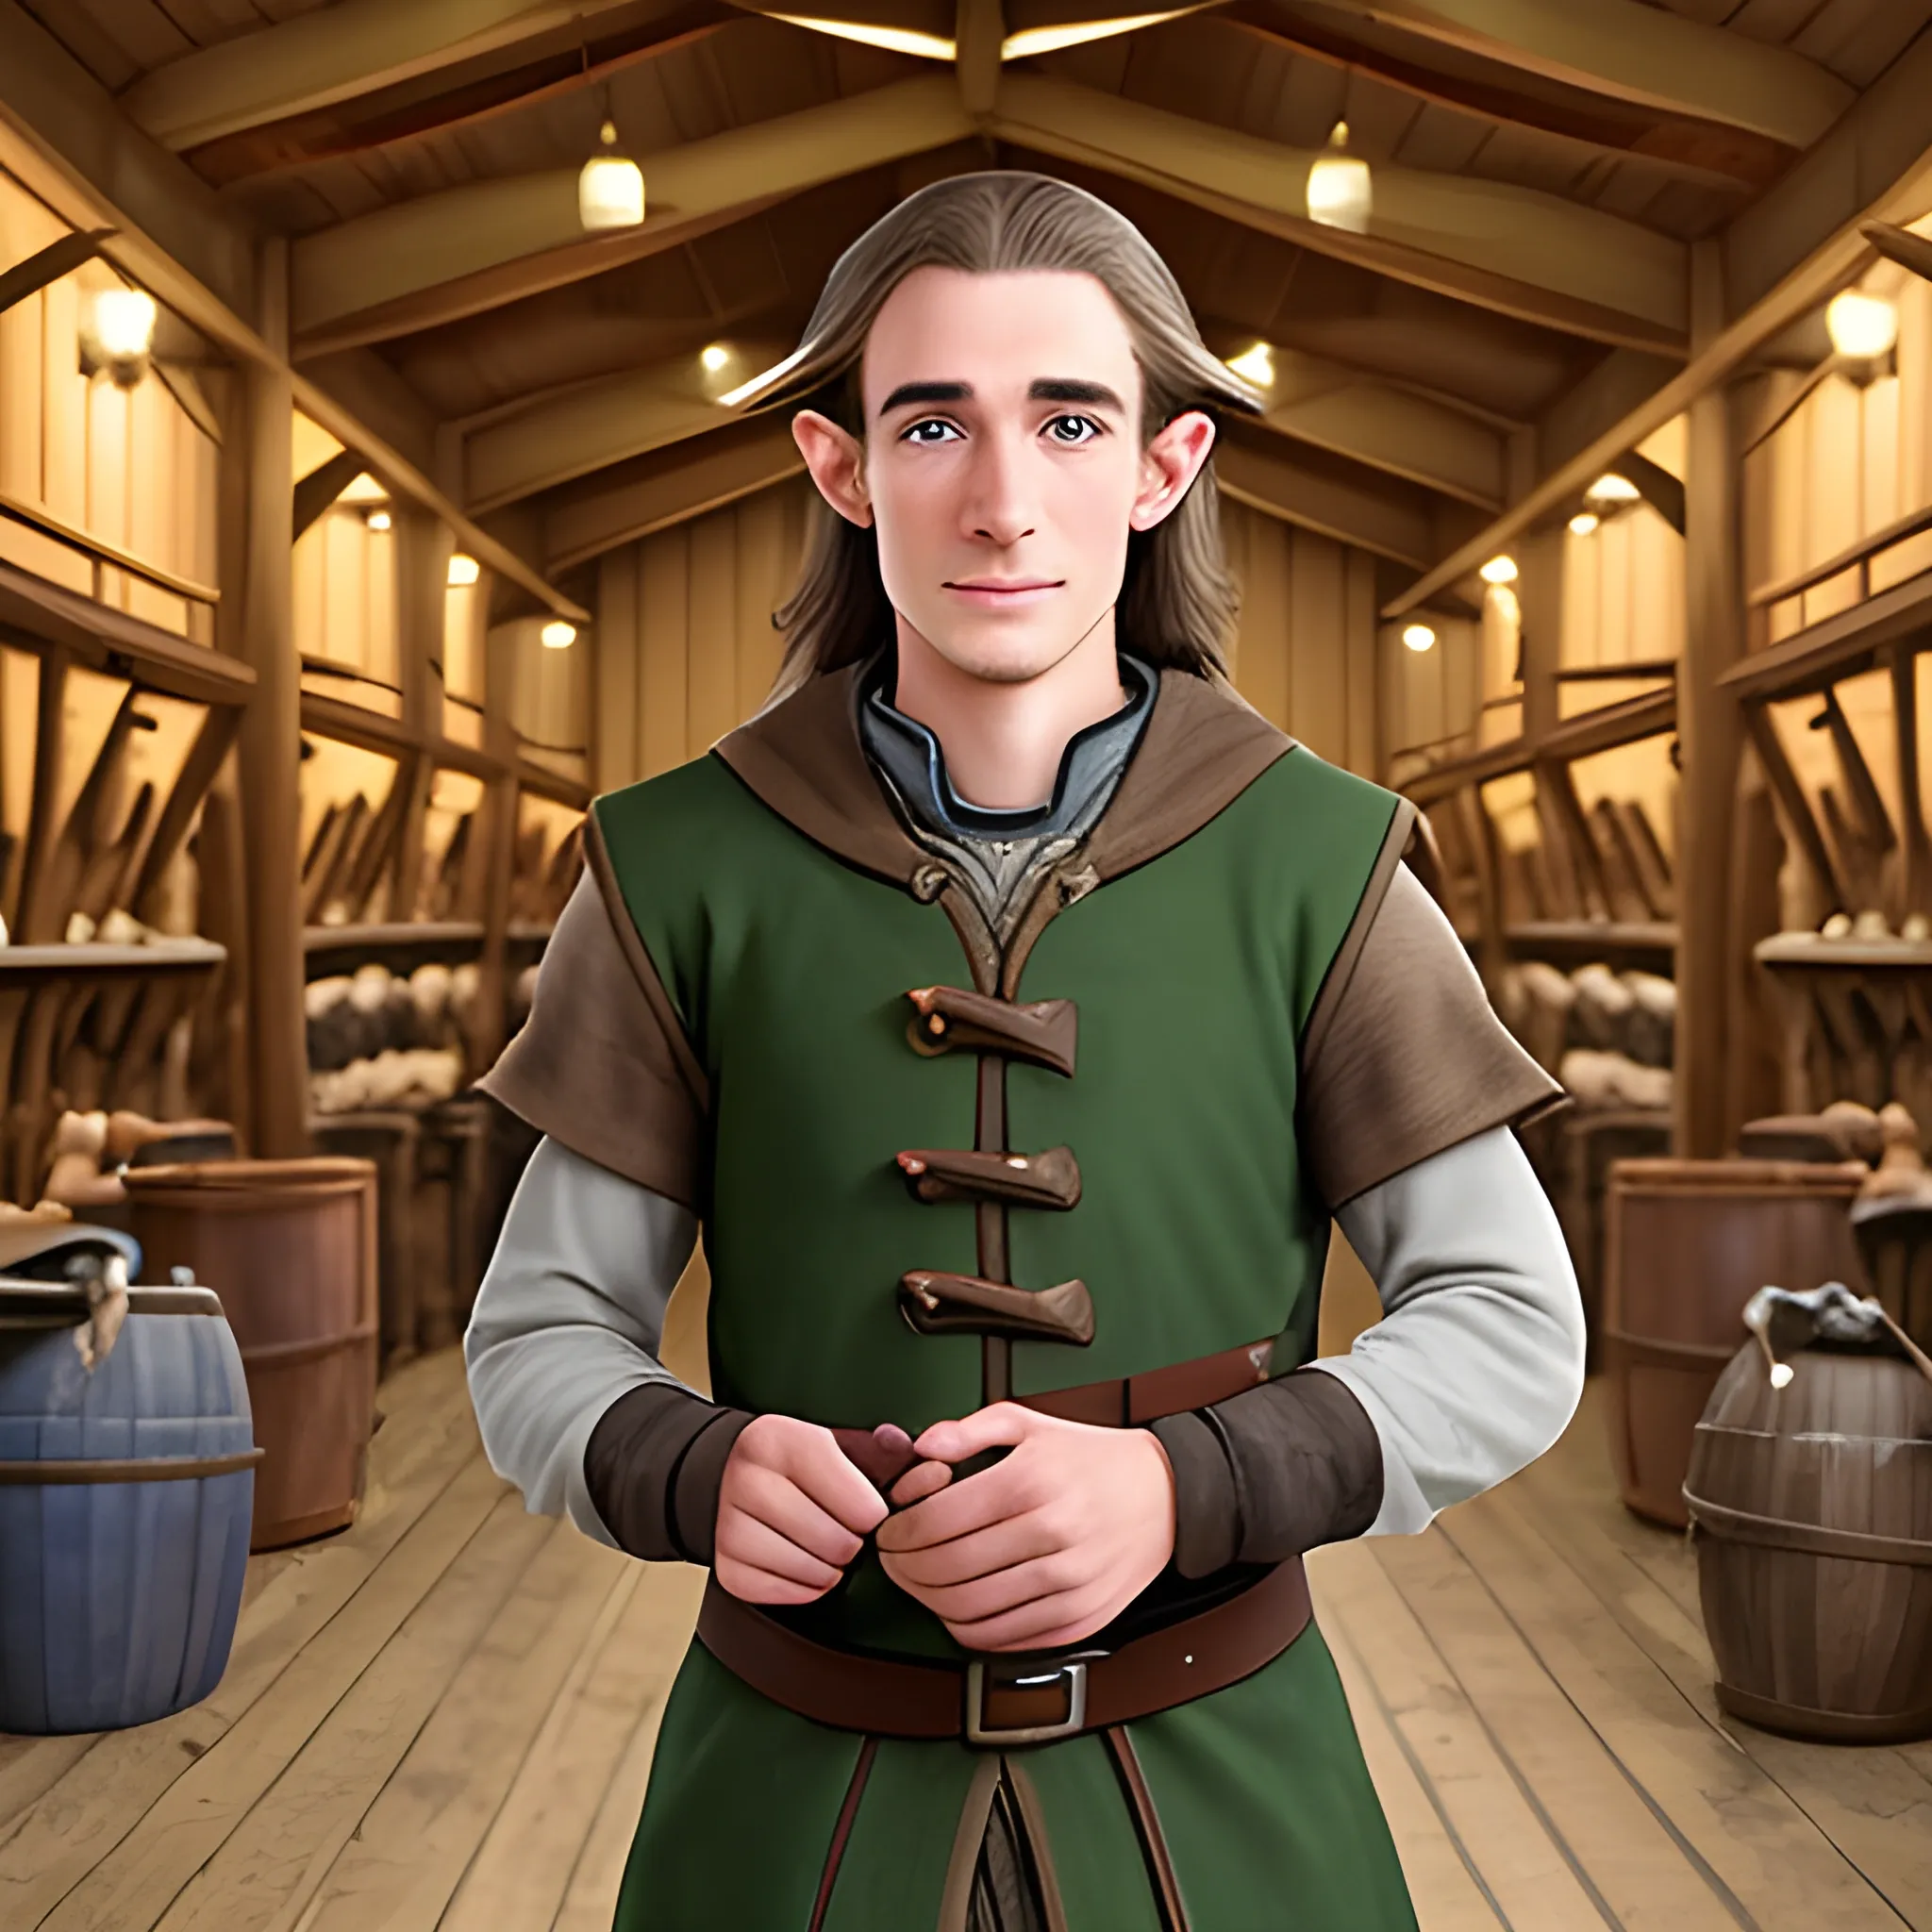 Kaelen the Stable Master: Kaelen, a friendly half-elf, manages the village stables. Known for his calming presence around horses, he ensures that the steeds are well cared for and ready to carry travelers to their destinations.